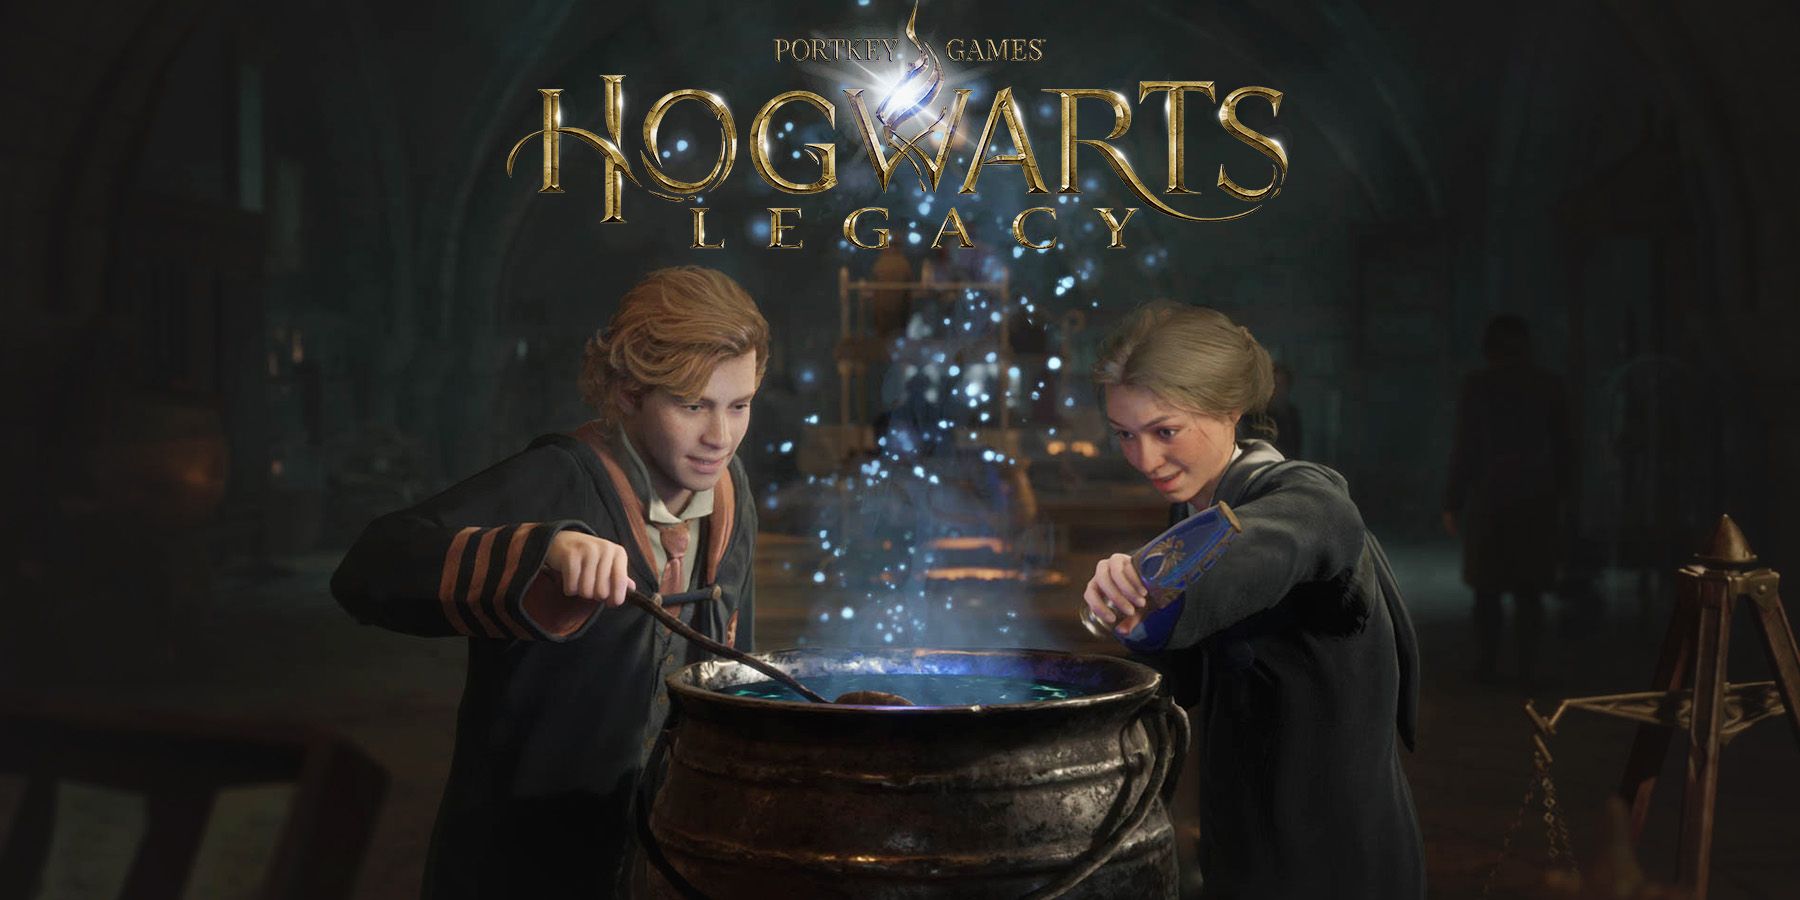 Hogwarts Legacy two characters making potion in cauldron beneath game logo